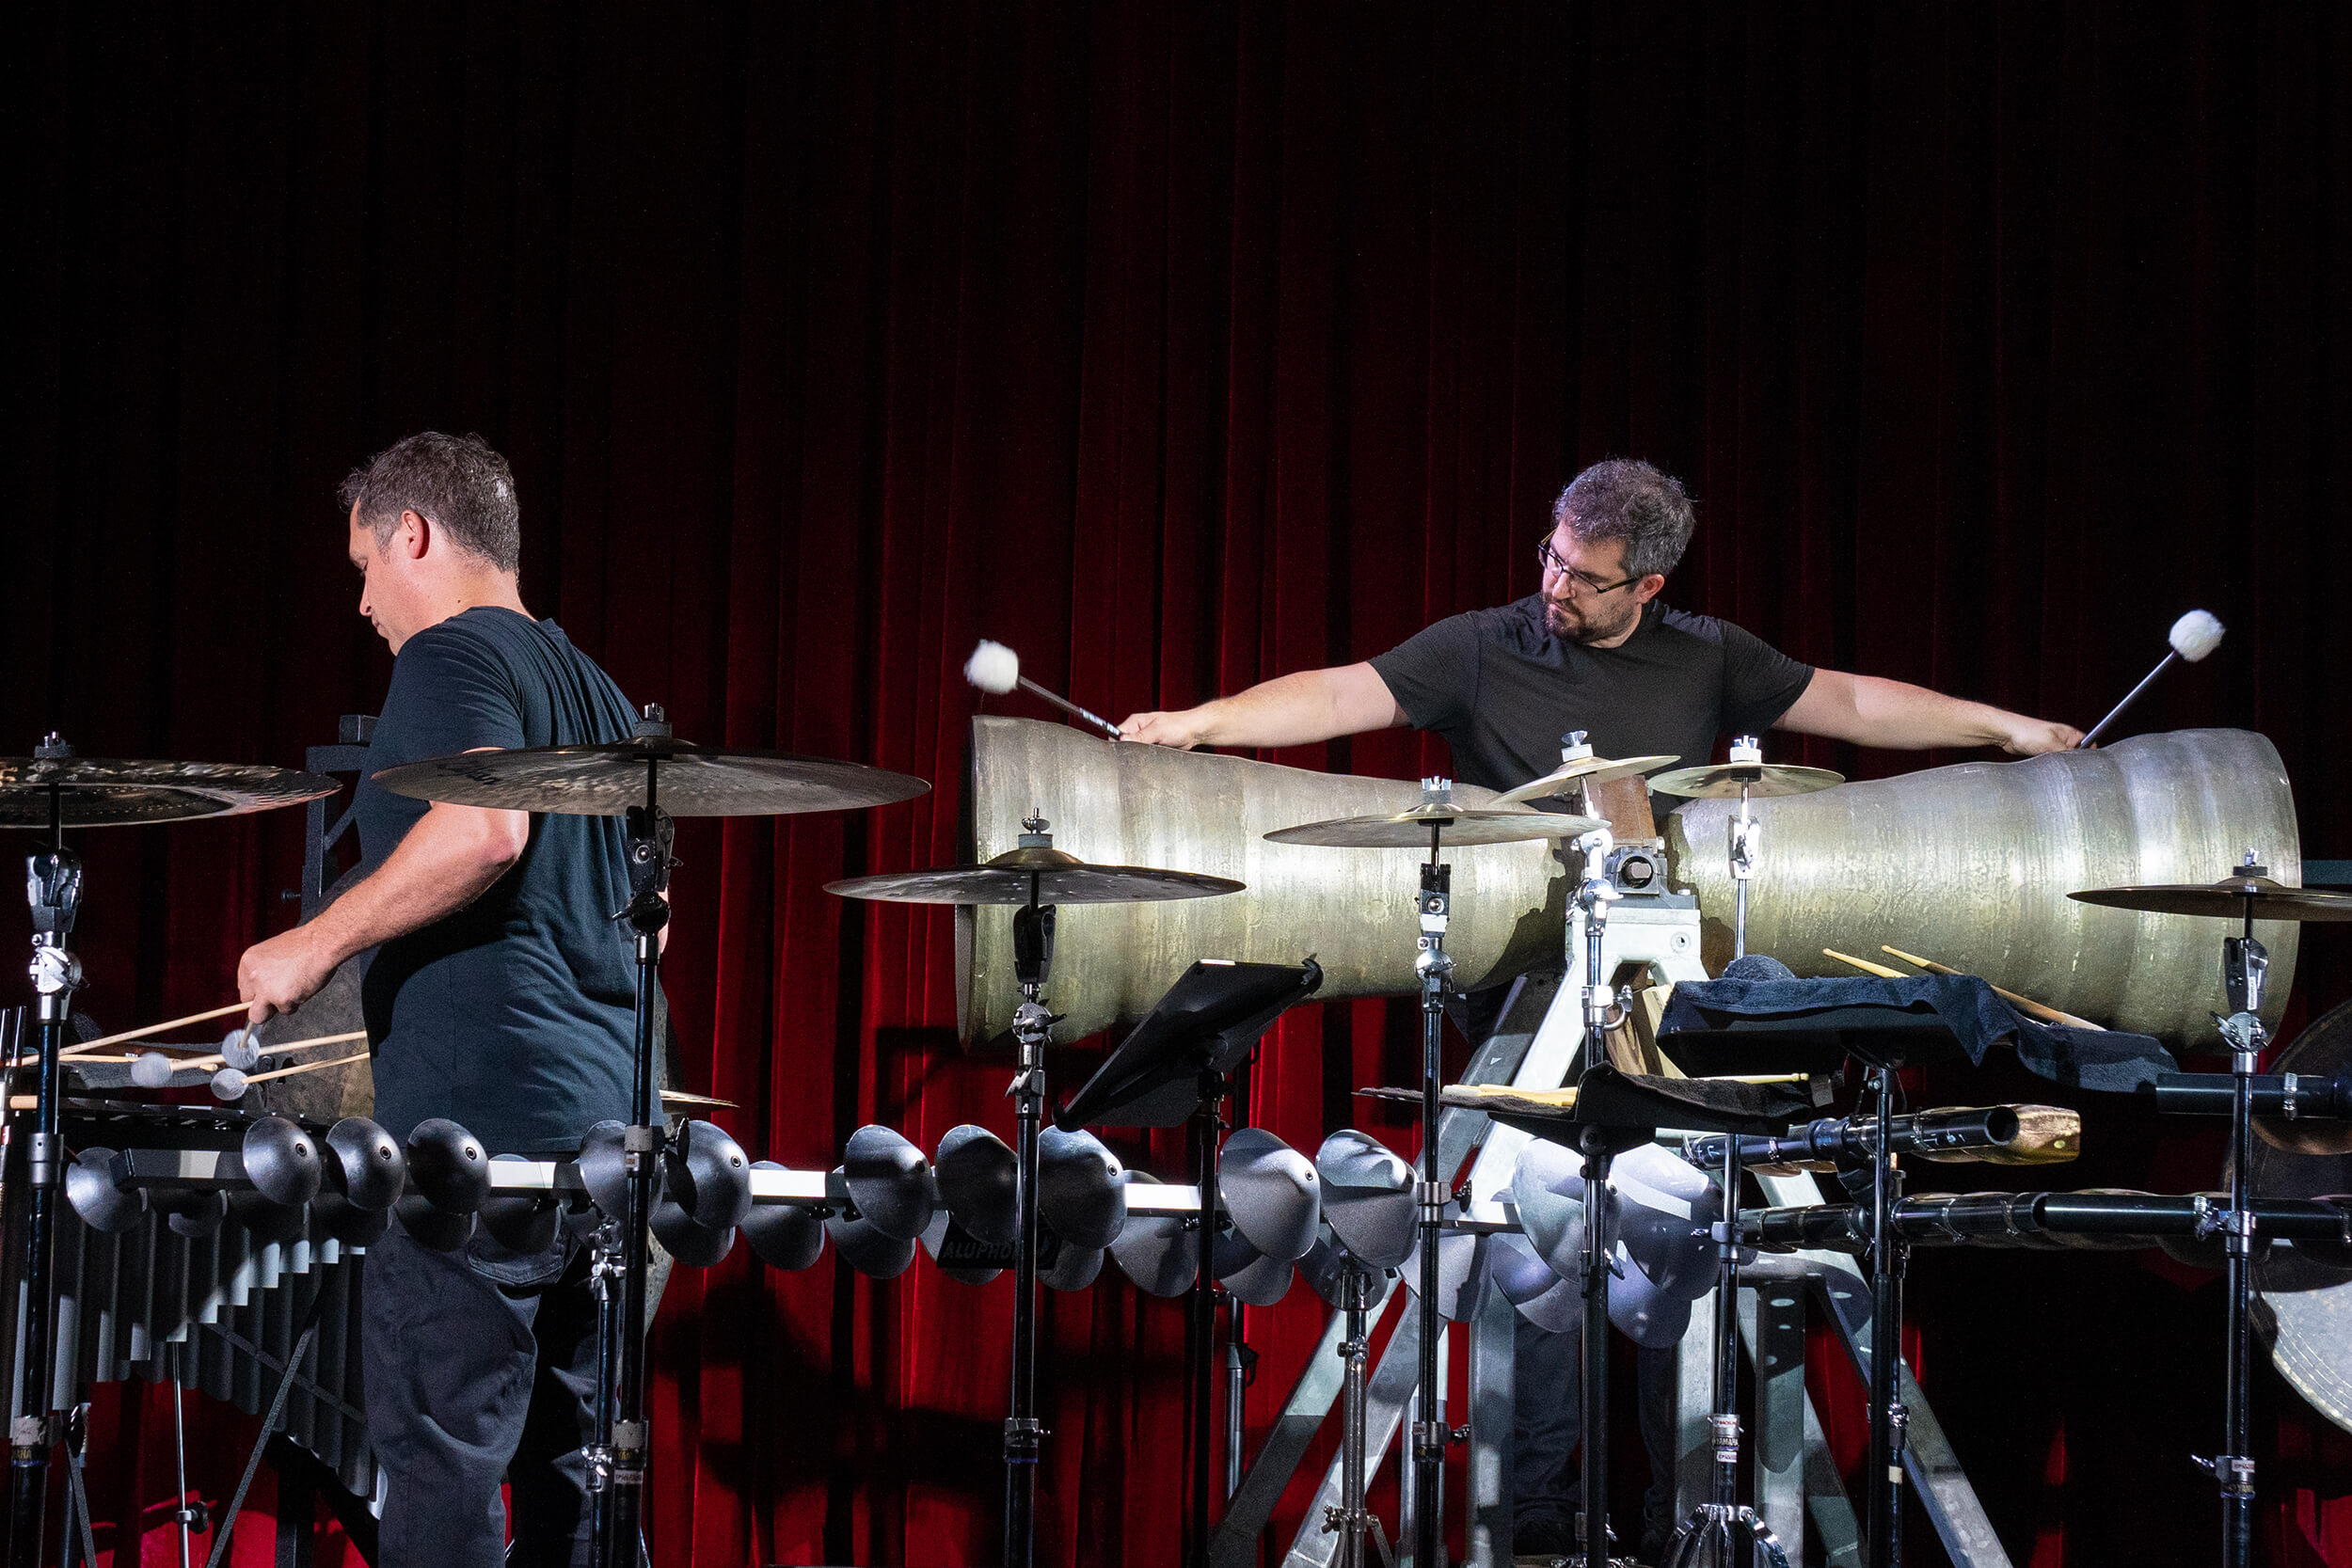 Christopher Whyte and Garrett Arney playing percussion instruments.